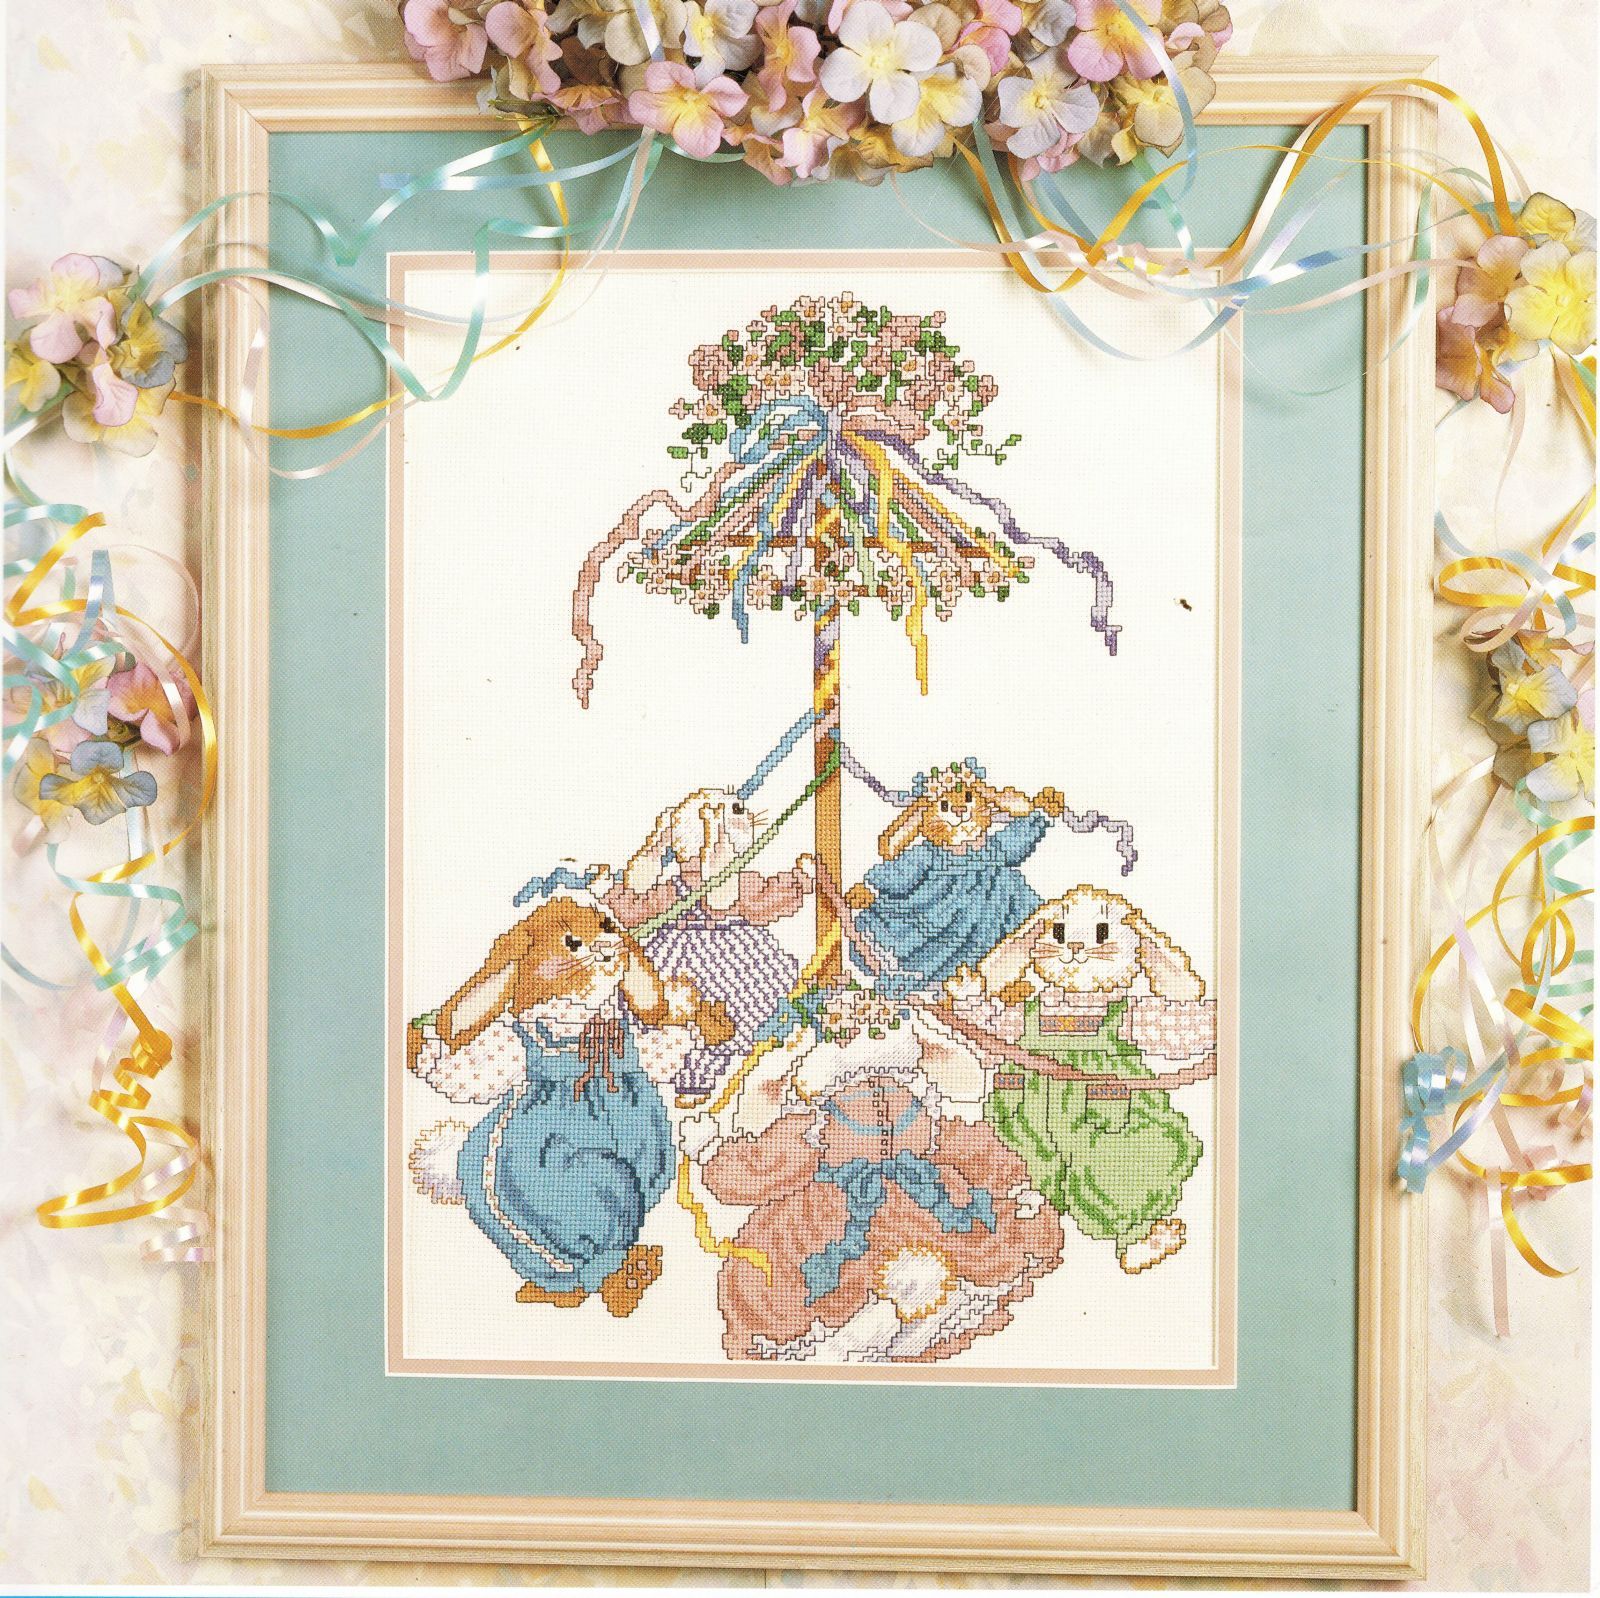 Candamar Maypole Bunnies Picture Counted Cross Stitch Kit 12" x 16" - $18.99